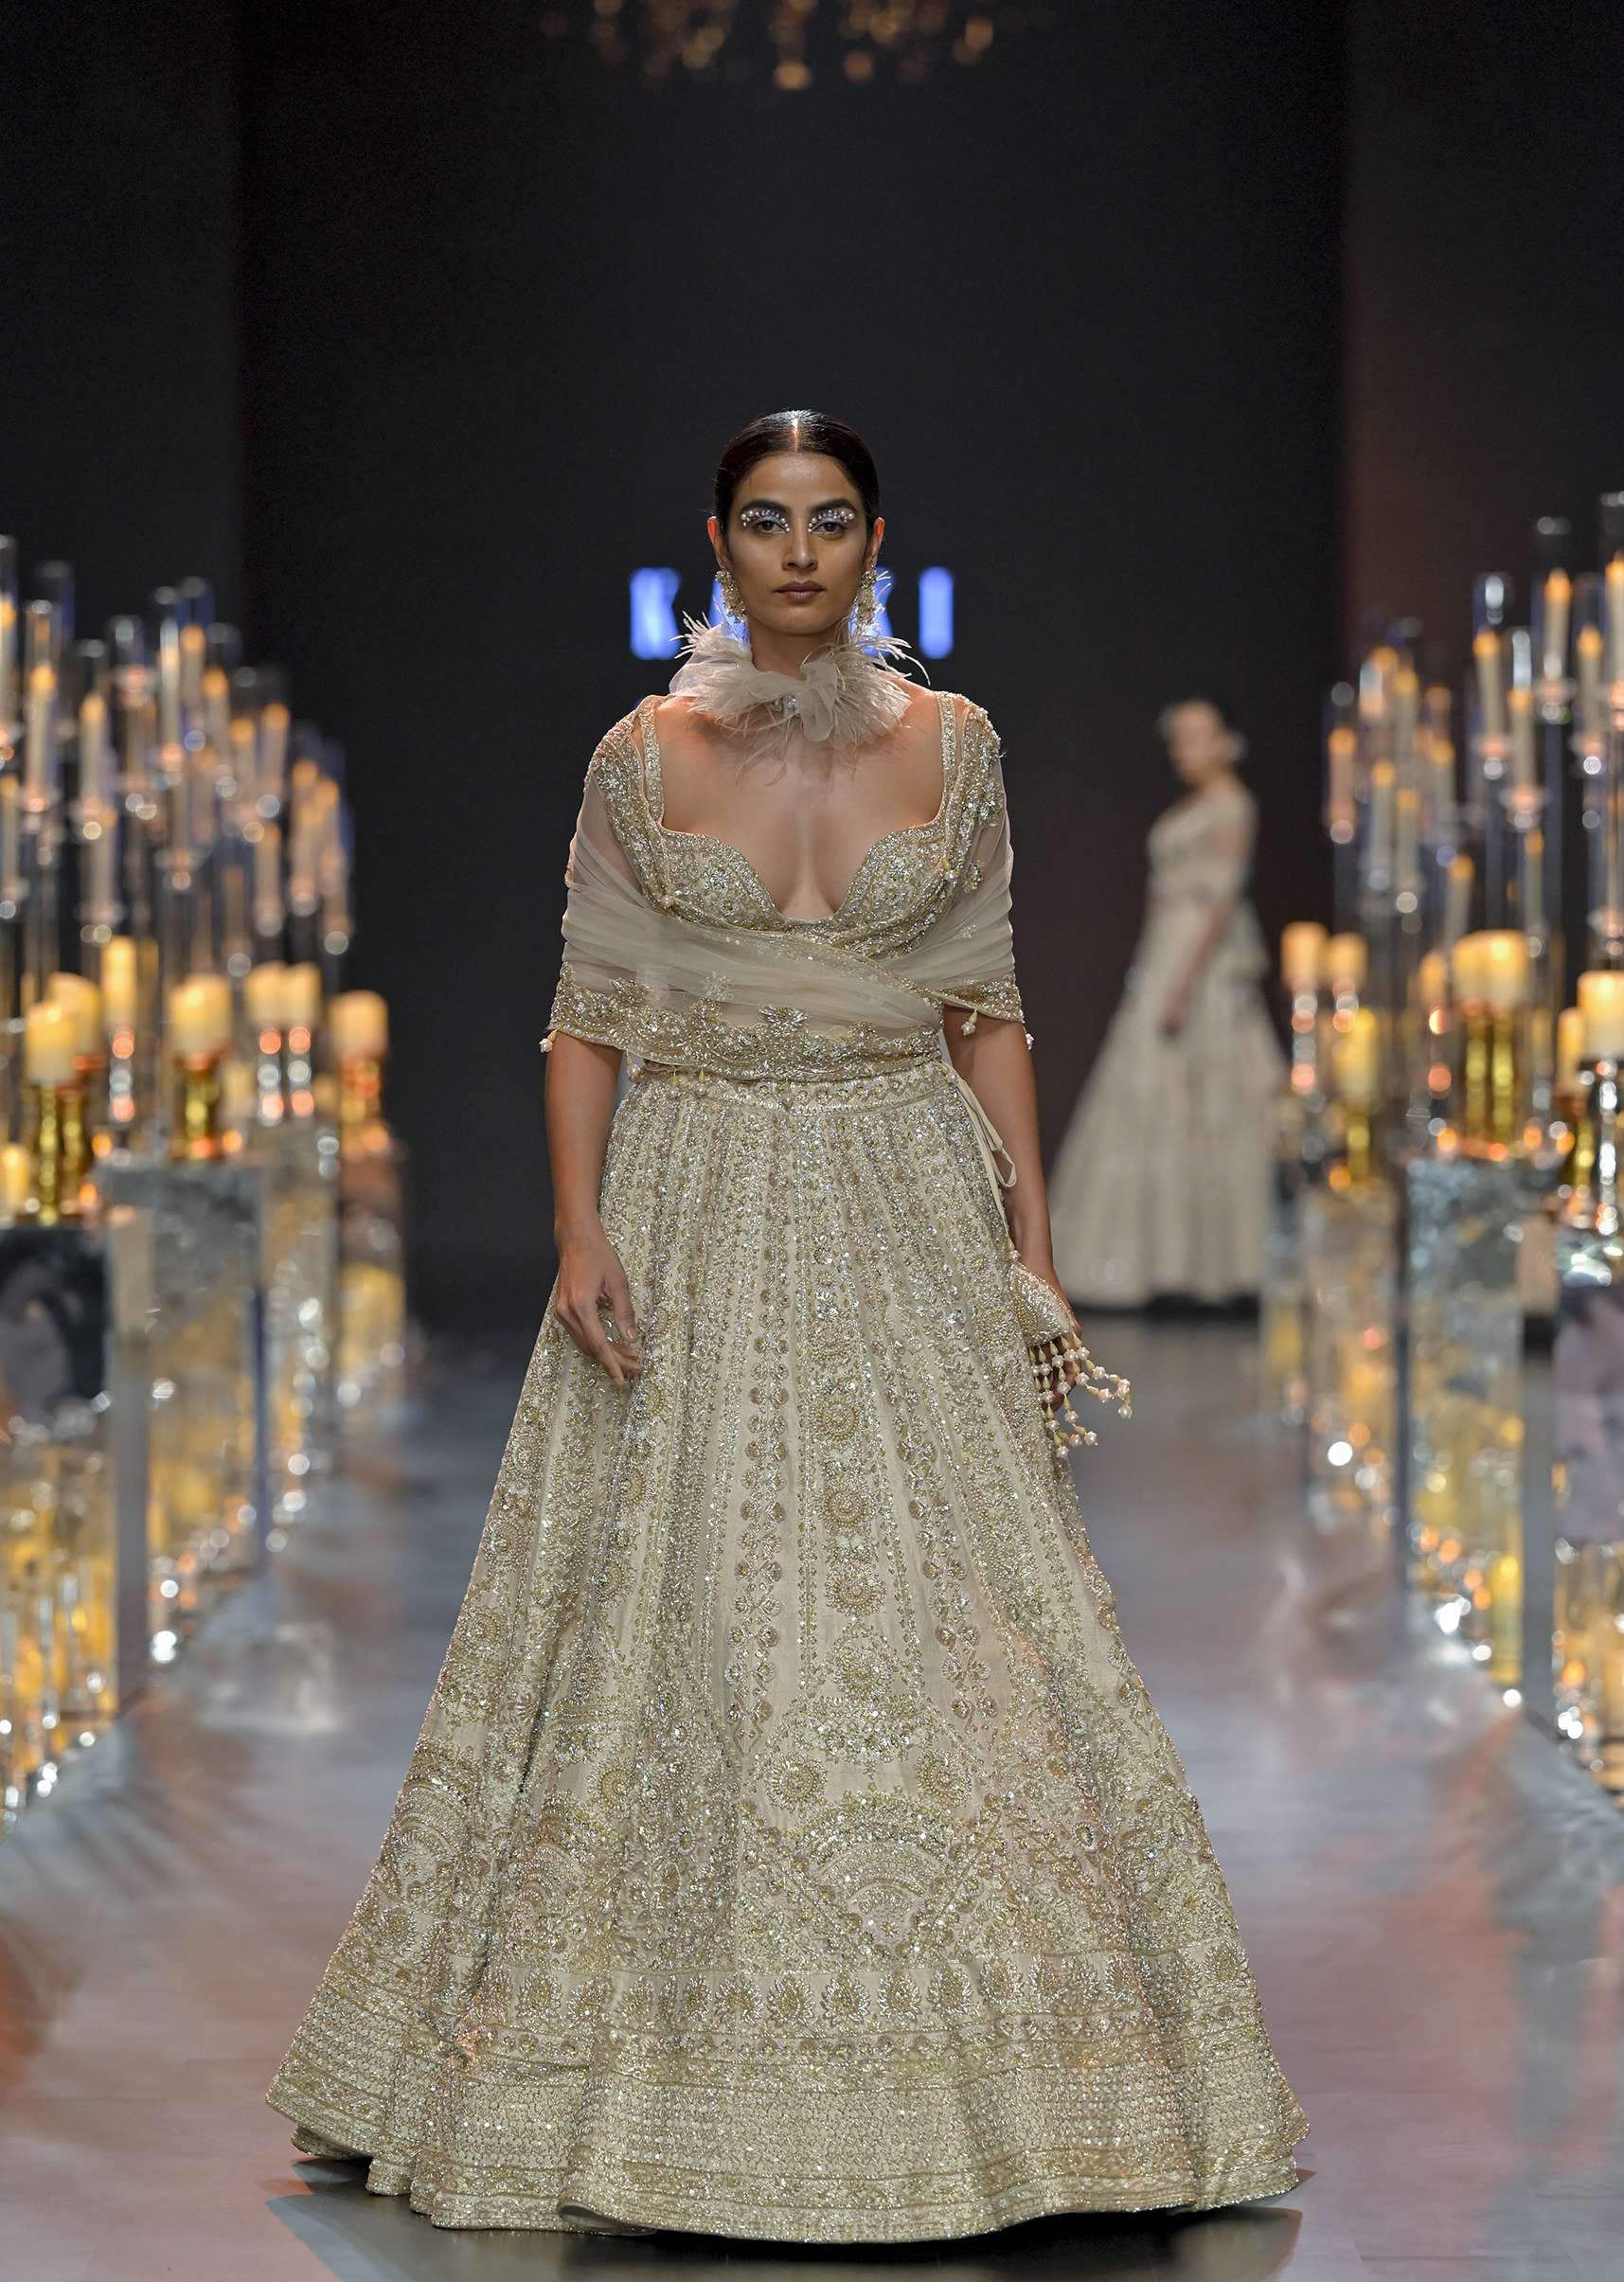 Beige Bridal Lehenga Set In Raw Silk With Corset Bodice And Heavy Embroidery